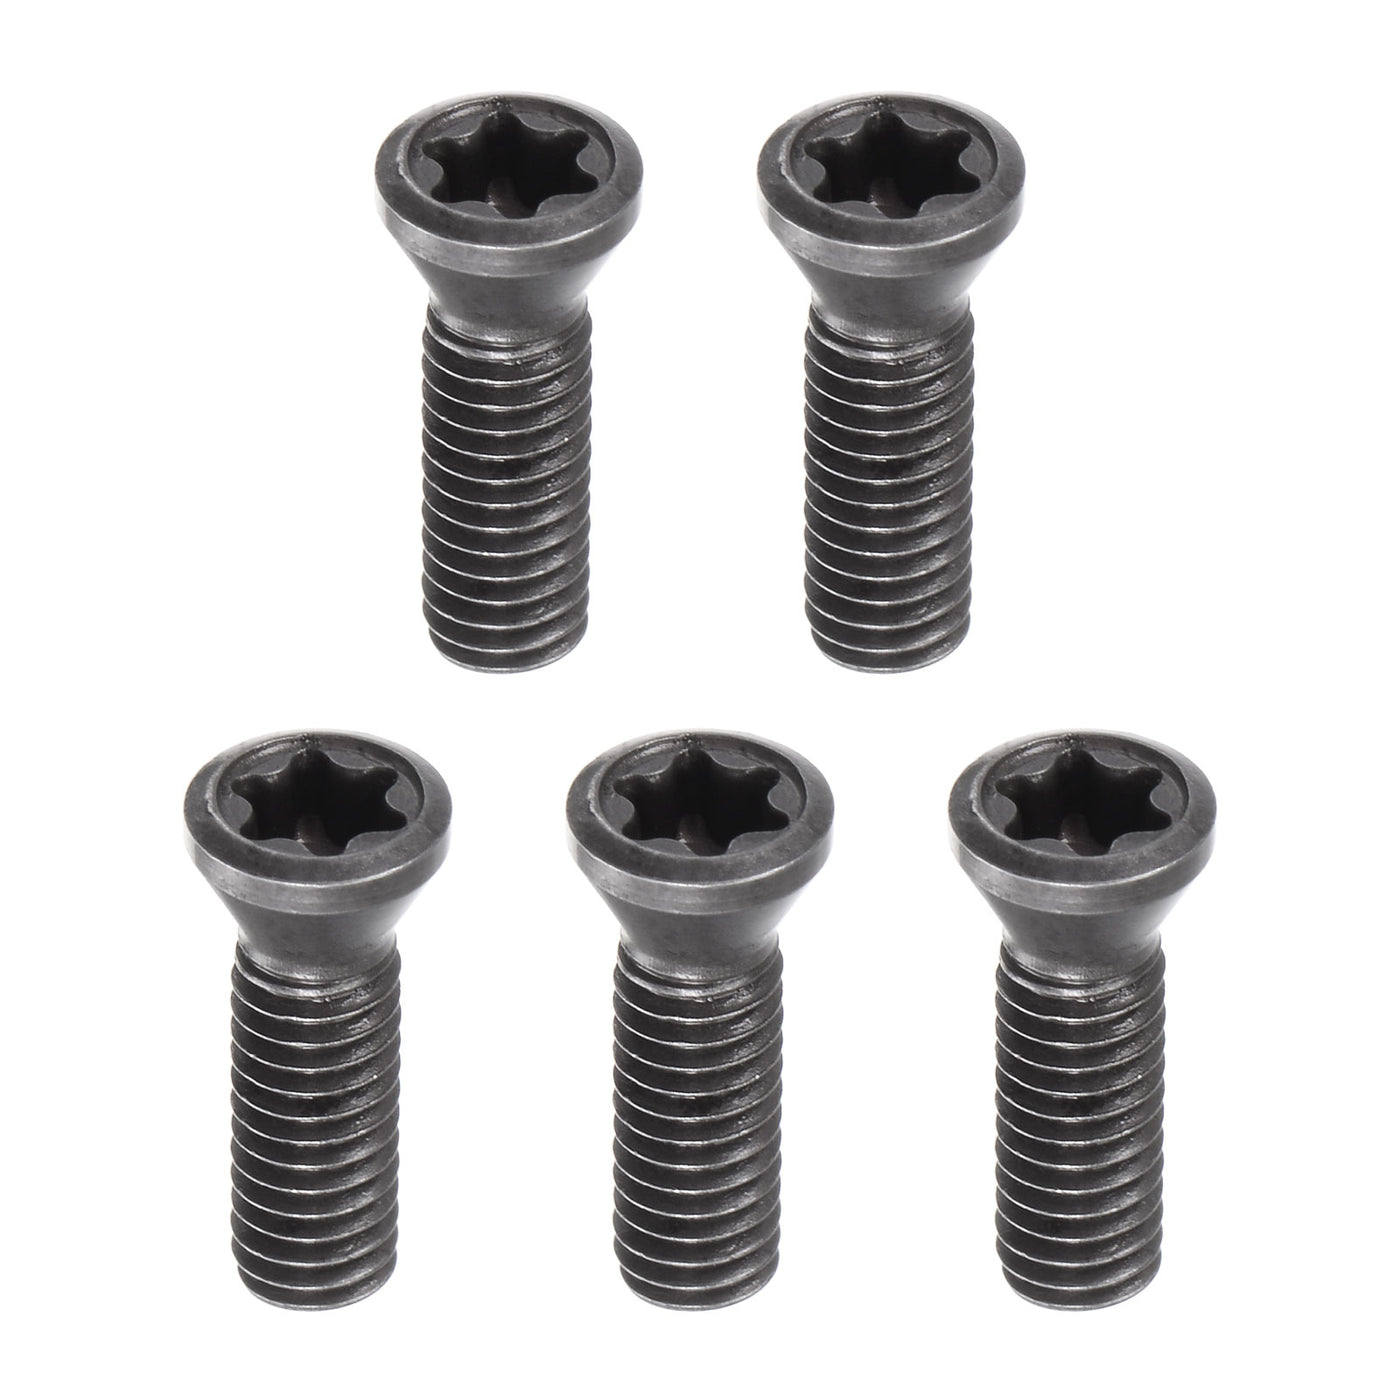 Uxcell Uxcell M3.5x12-D5.3 Torx Set Screws for CNC Lathe Turning Tool Holder, 5Pcs